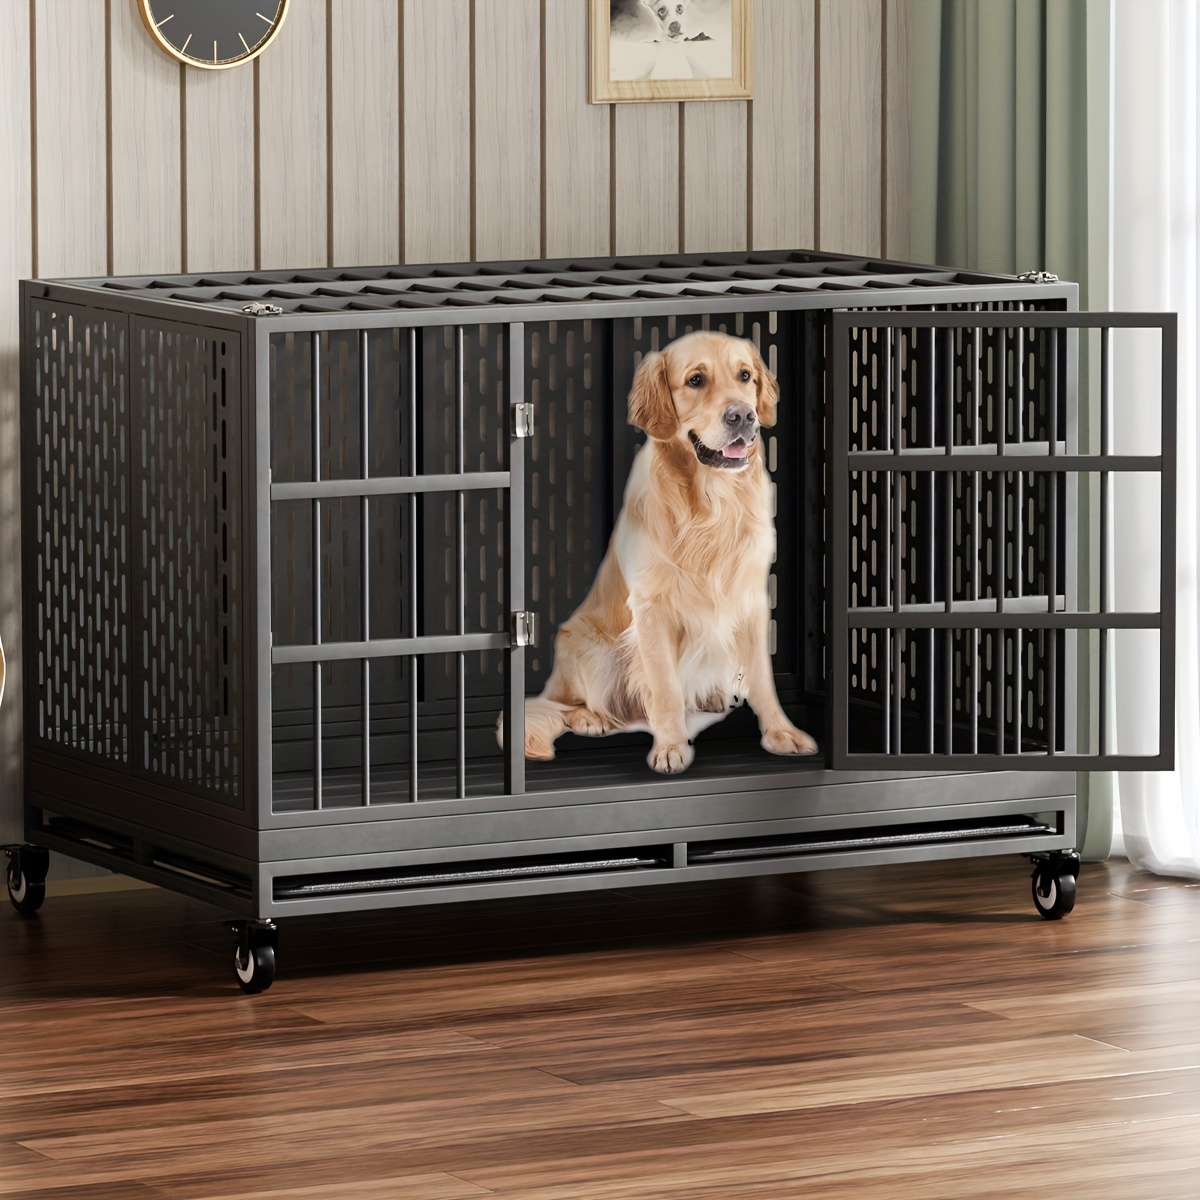 

48 Inch Heavy Duty Dog Crate With Wheels And Unique Rod, Folding Metal Big Dog Cage For Large Dogs, Extra Large Dog Crate With Removable Tray